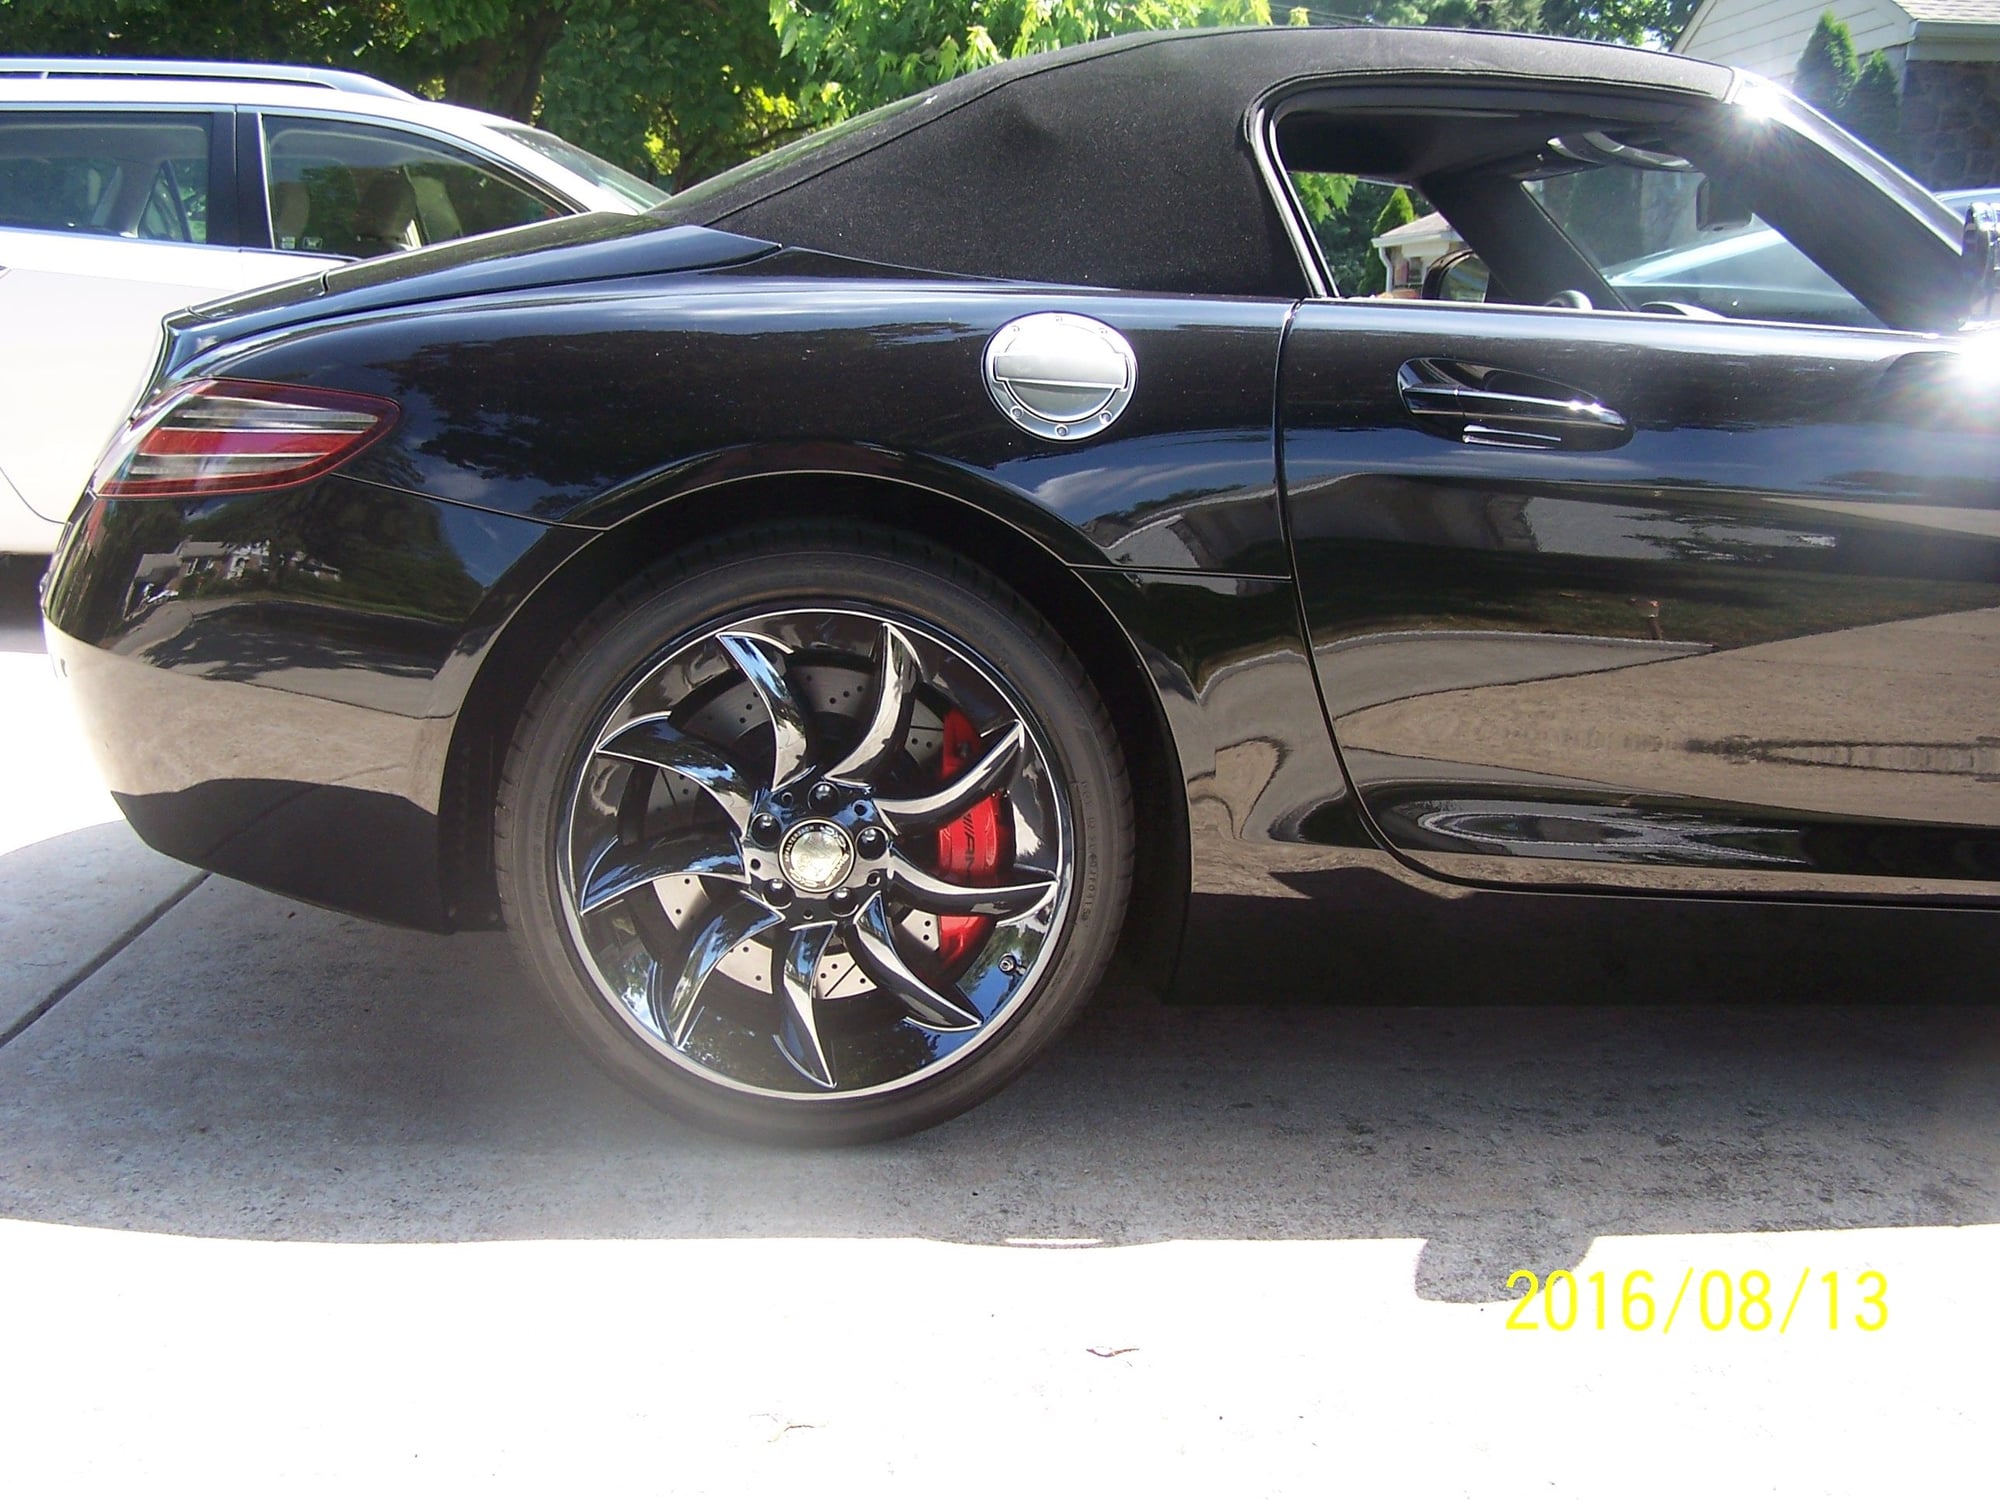 Wheels and Tires/Axles - SLR MCLAREN 2005-2009 TURBINE WHEEL  MODIFIED TO FIT 2012 AMG SLS - Used - 2011 to 2014 Mercedes-Benz SLS AMG - Wilmington, DE 19803, United States